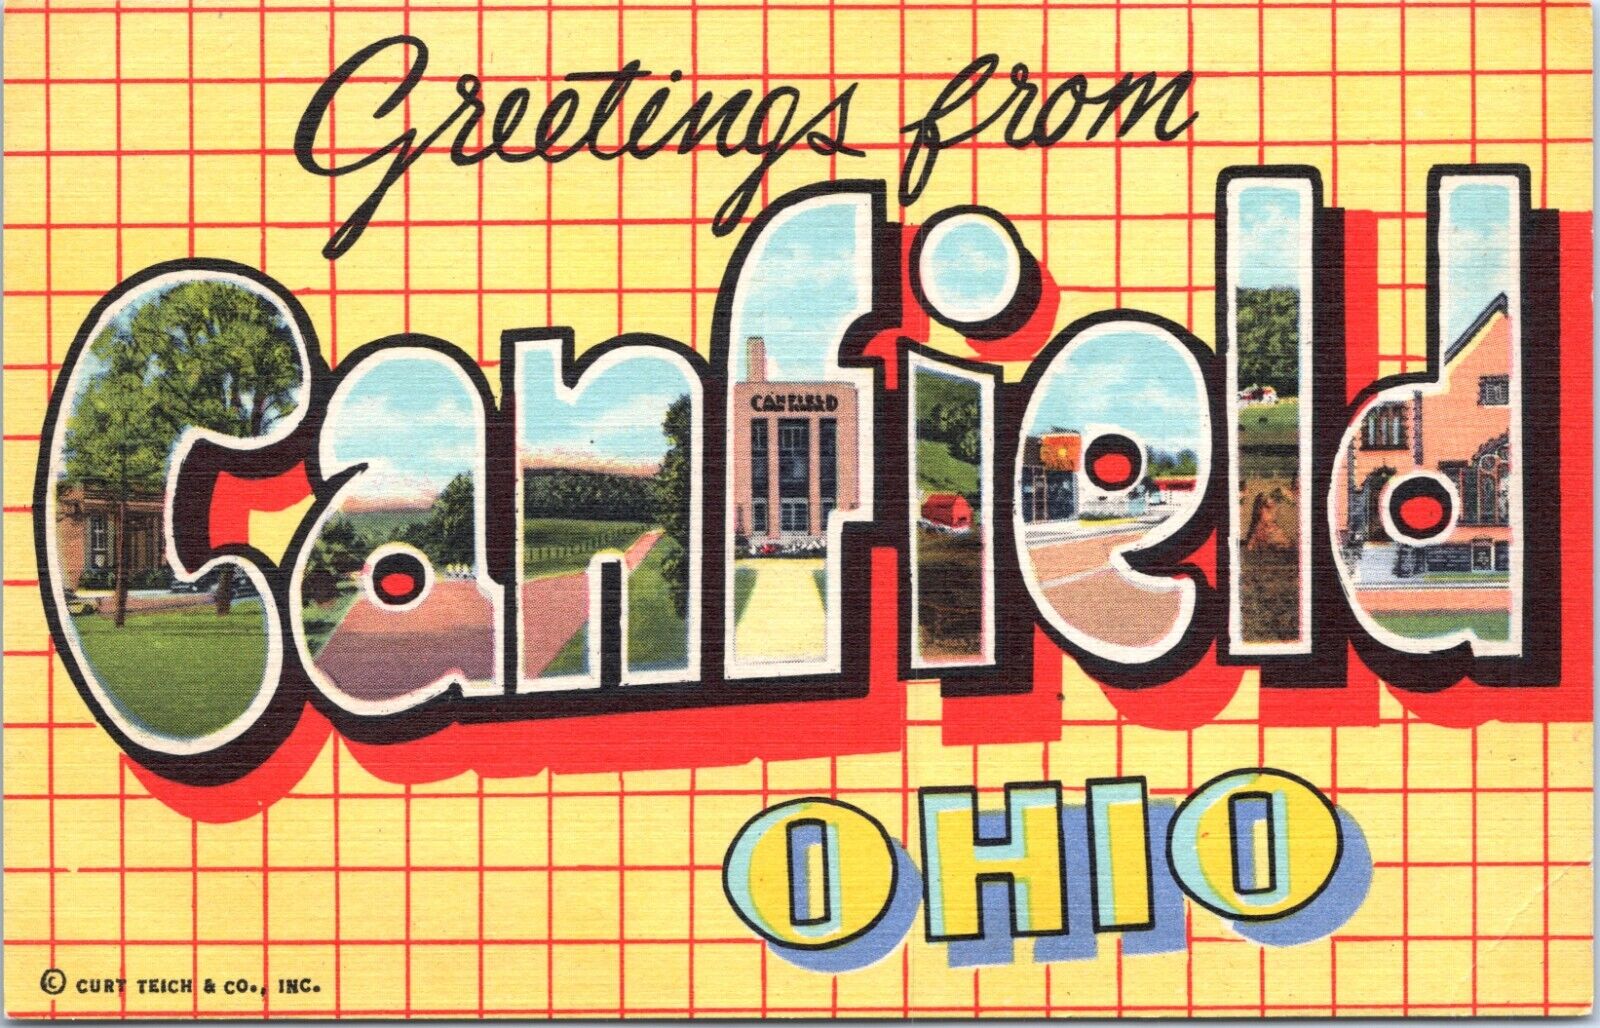 Postcard Greetings from Canfield Ohio - 1953 - Large Letter Card